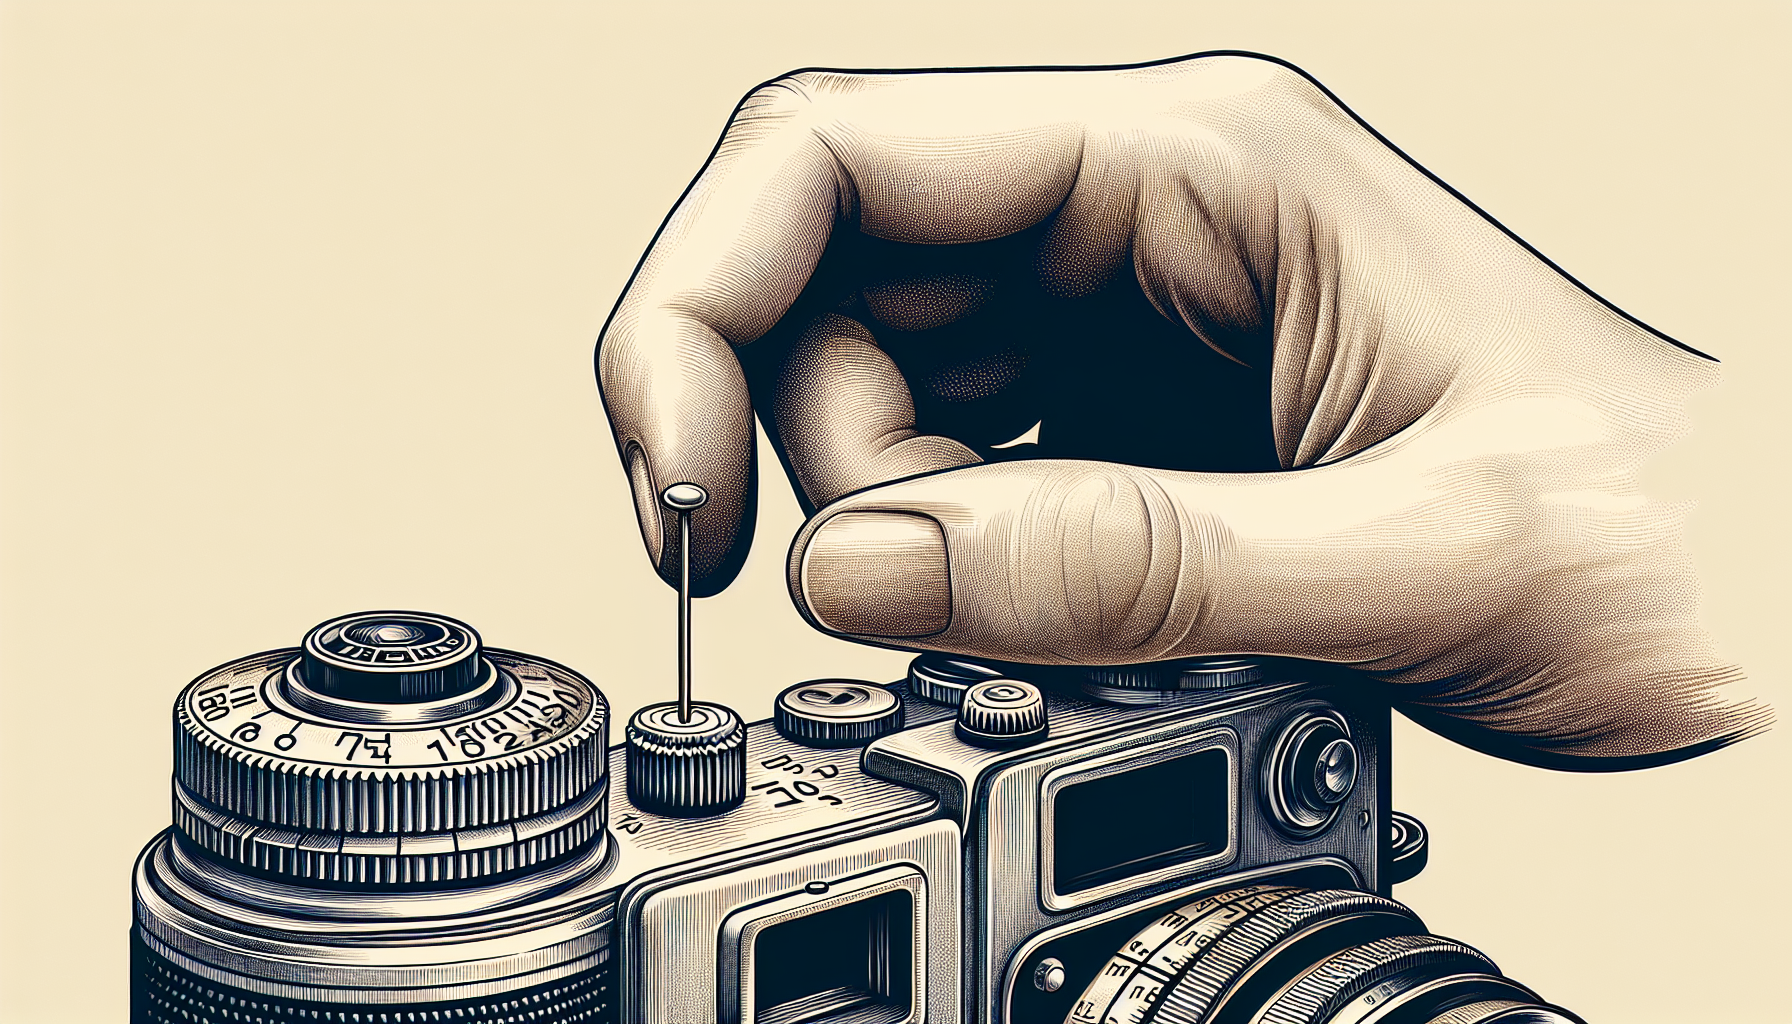 Illustration of a hand locating the reset button on a camera